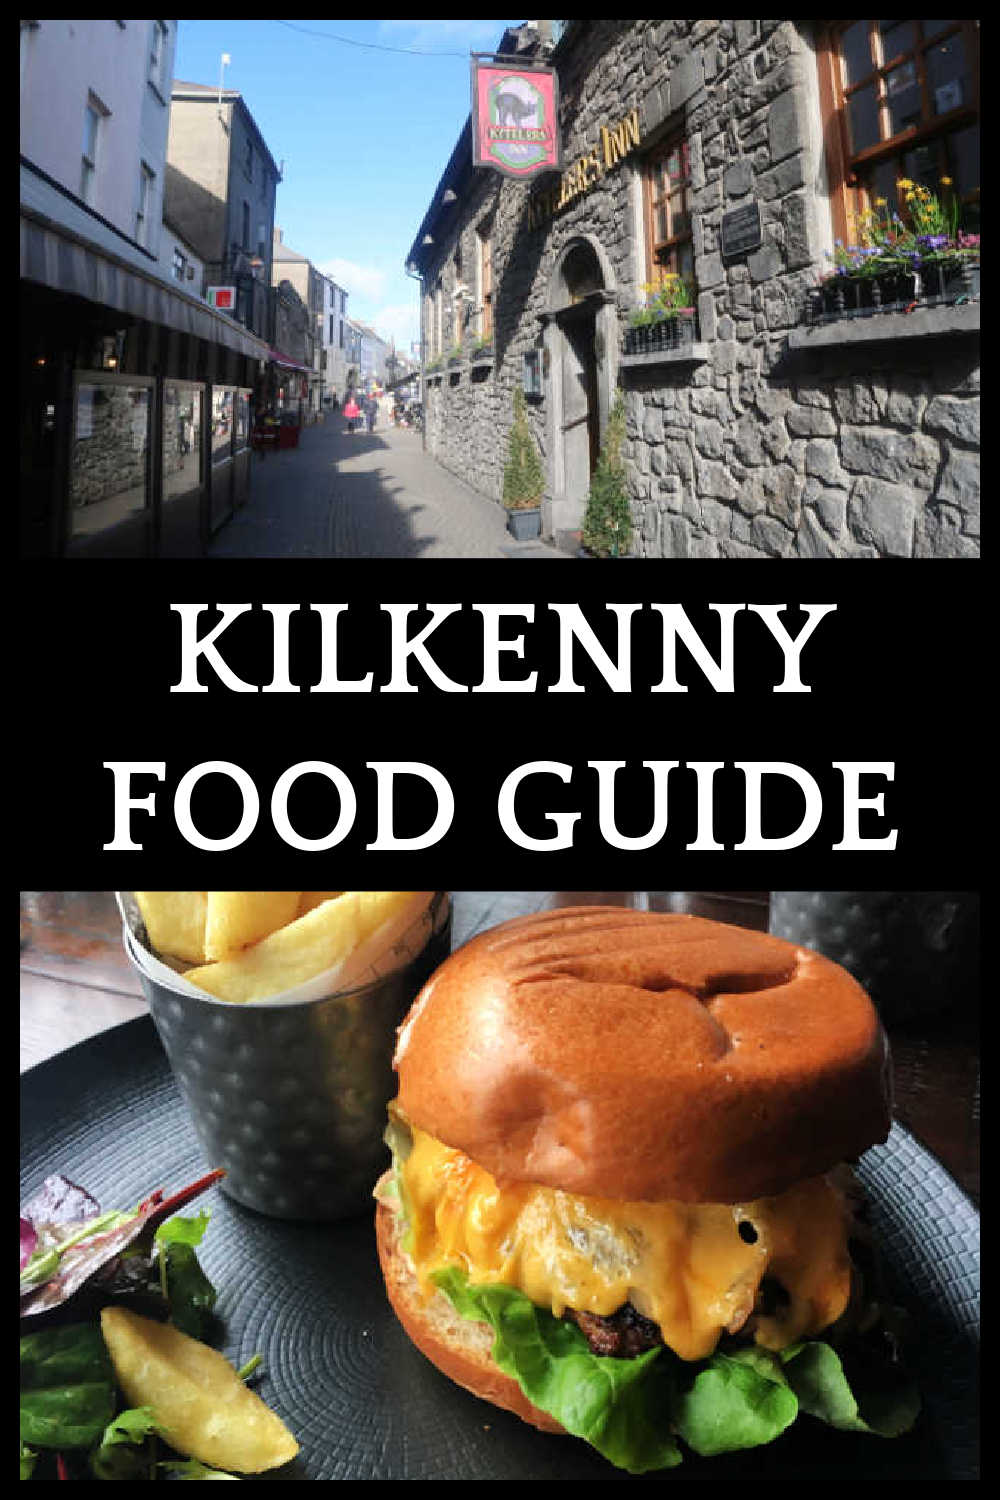 Kilkenny Restaurants Guide - list of the best places to eat in Kilkenny City Ireland - with map to help you find all of the top spots on a DIY food tour.